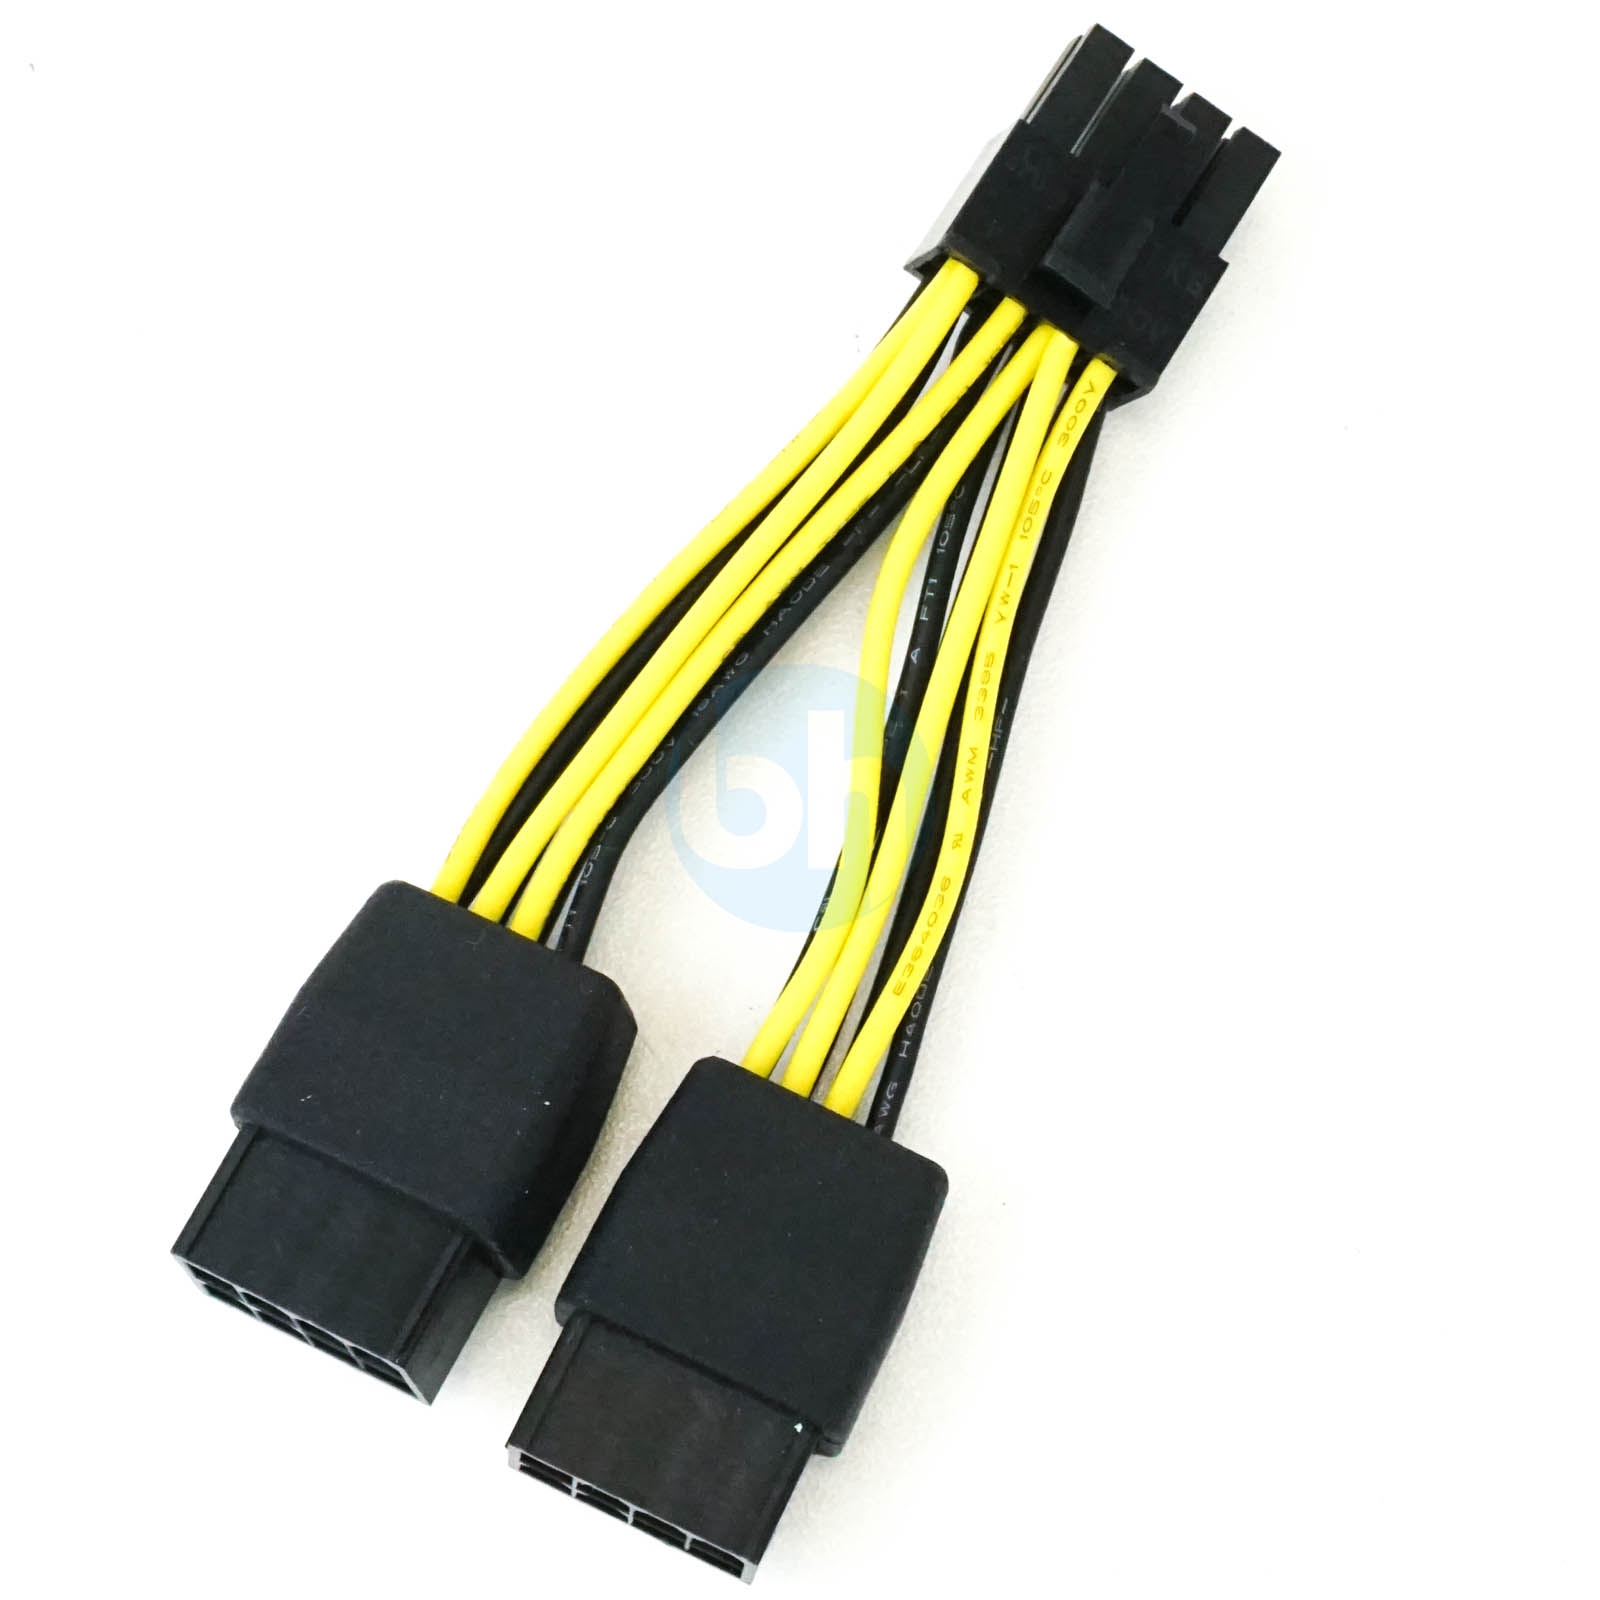 nVidia K80, M60, M40, P40, P100, V100 2x PCIe 8-Pin to 8-Pin CPU EPS Power Cable